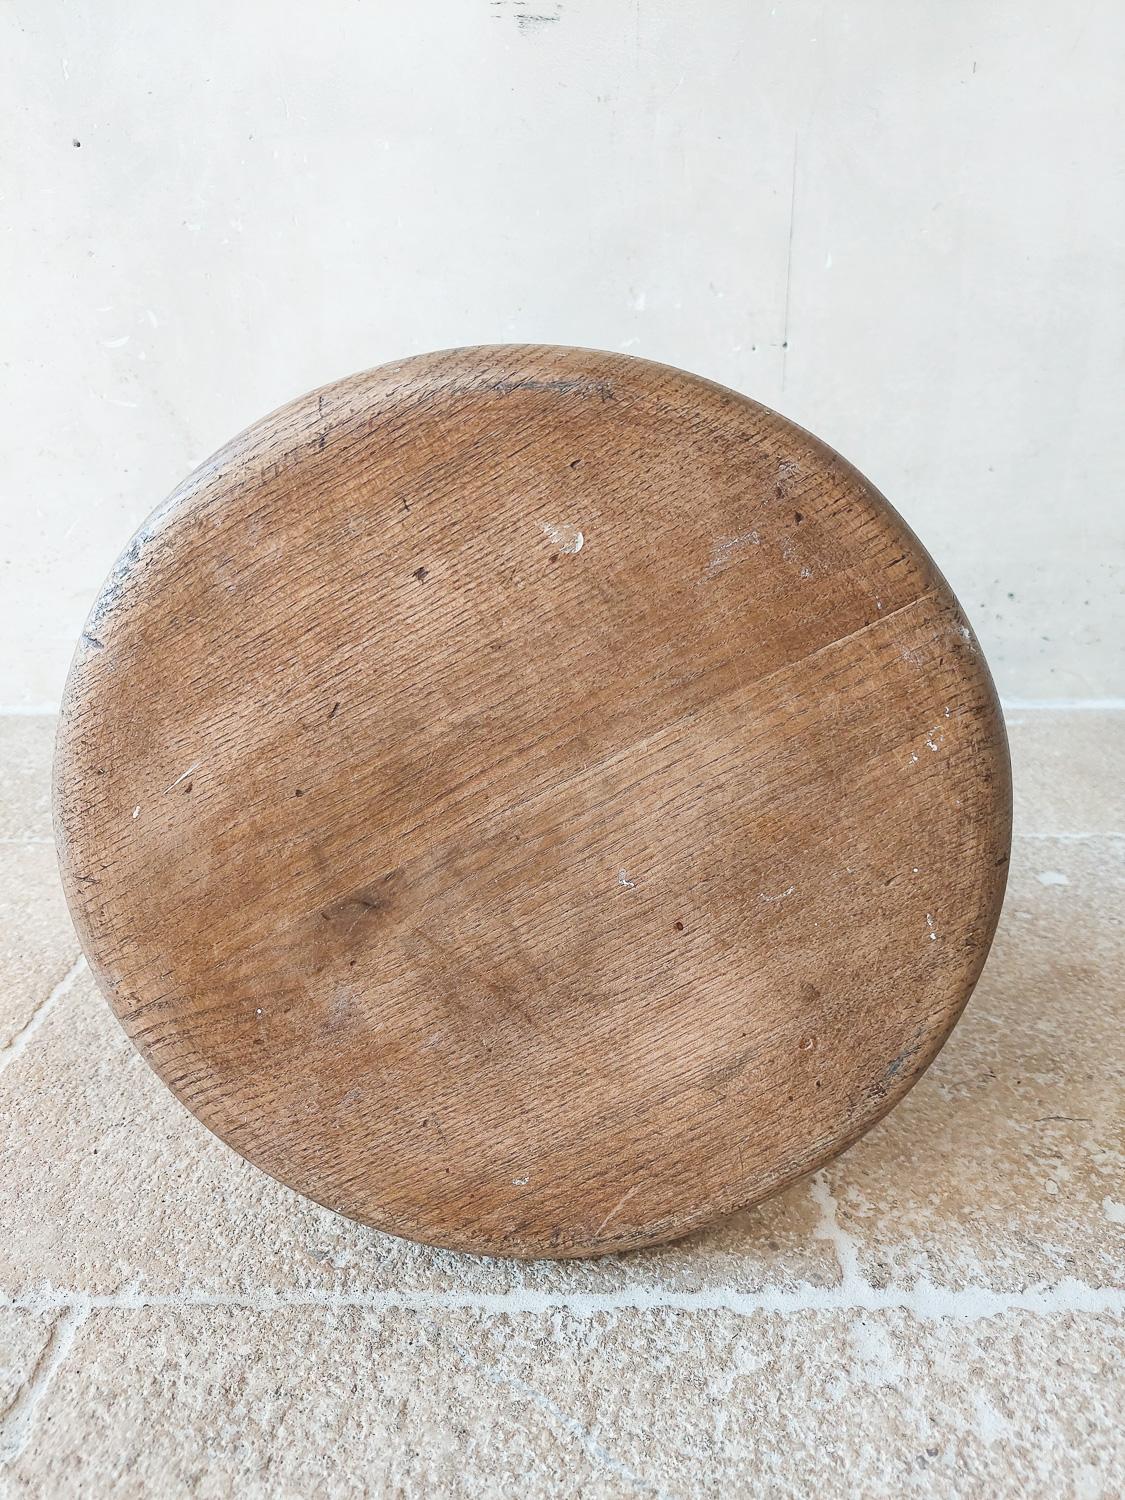 Charlotte Perriand Wooden Berger Stool, circa 1950 For Sale 4